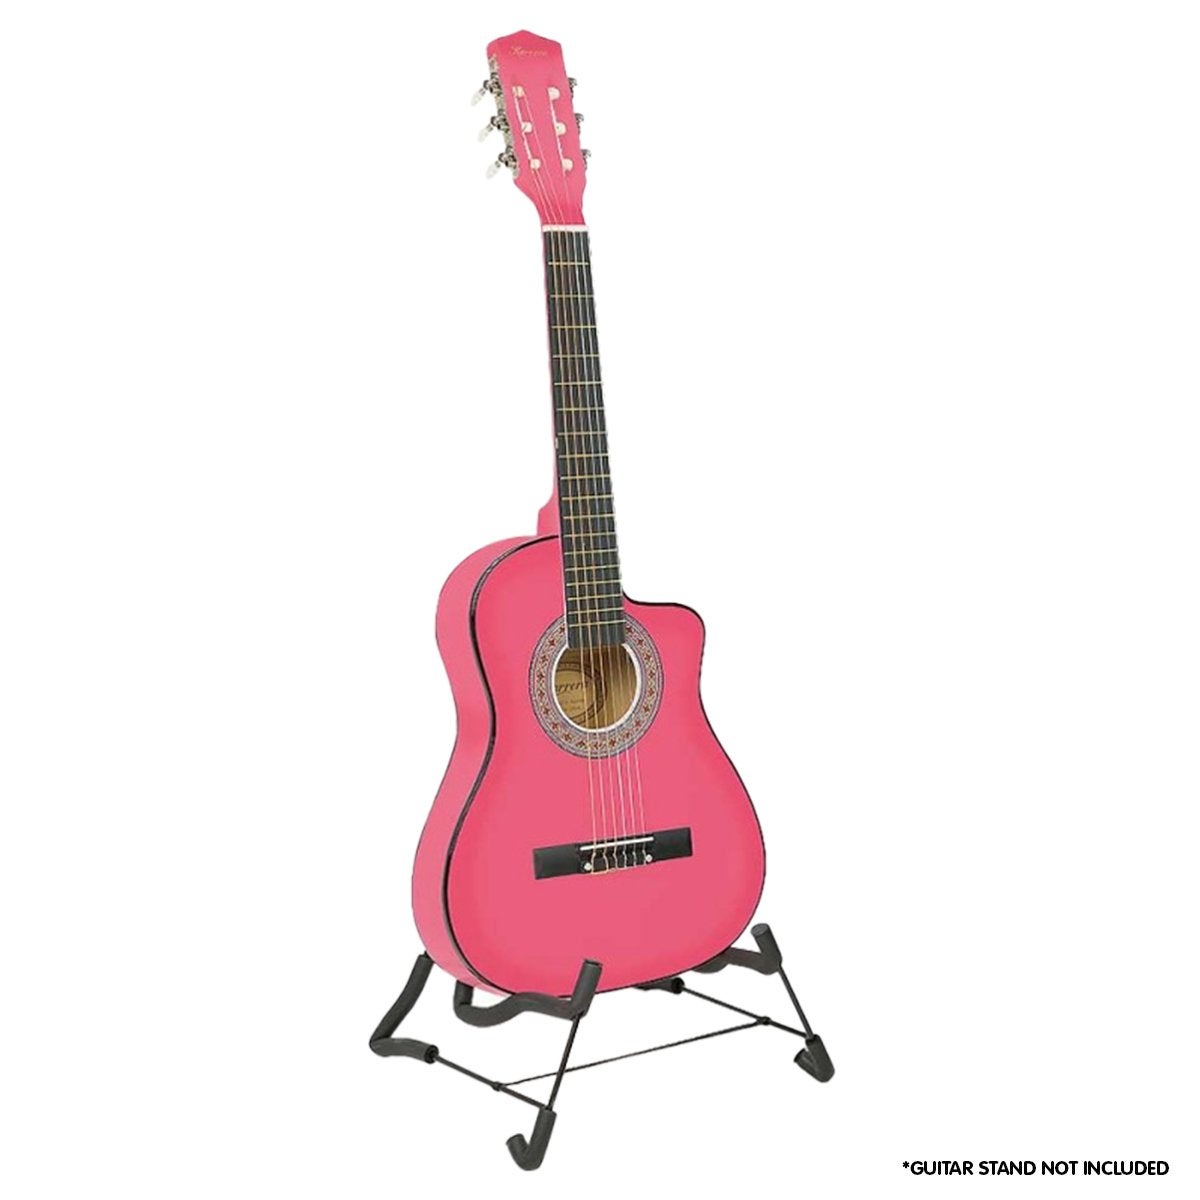 Karrera Pink Childrens Acoustic Guitar Ideal Kids Gift 1/2 Size